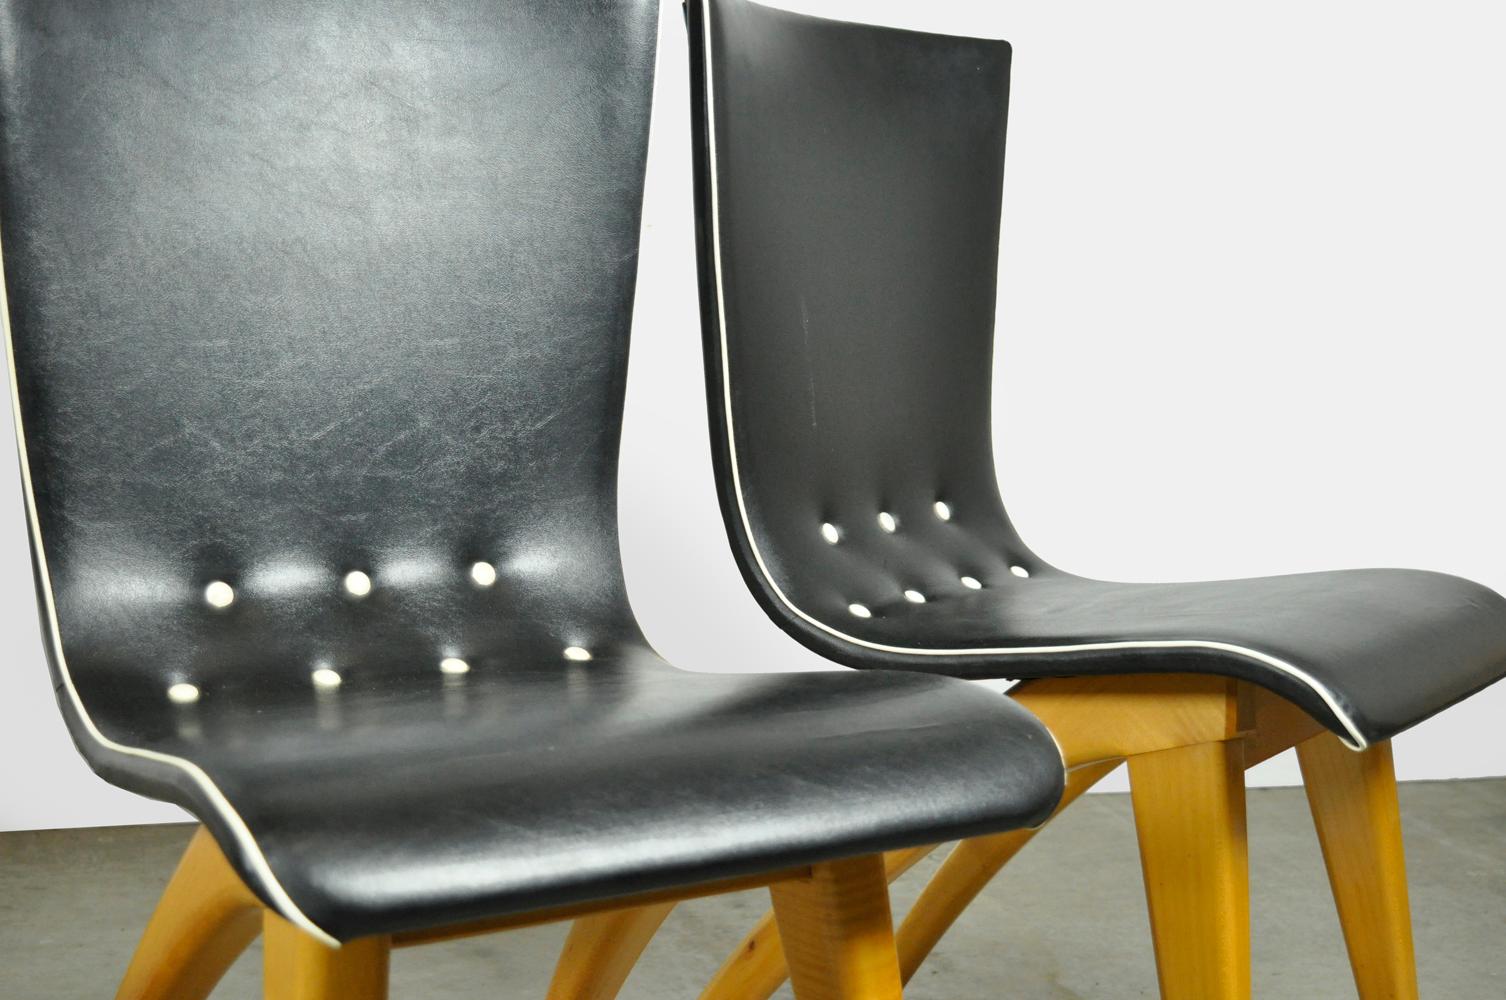 Leather Set wingback dining chairs (4) by G.J. van Os for van Os Culemborg, 1950s For Sale